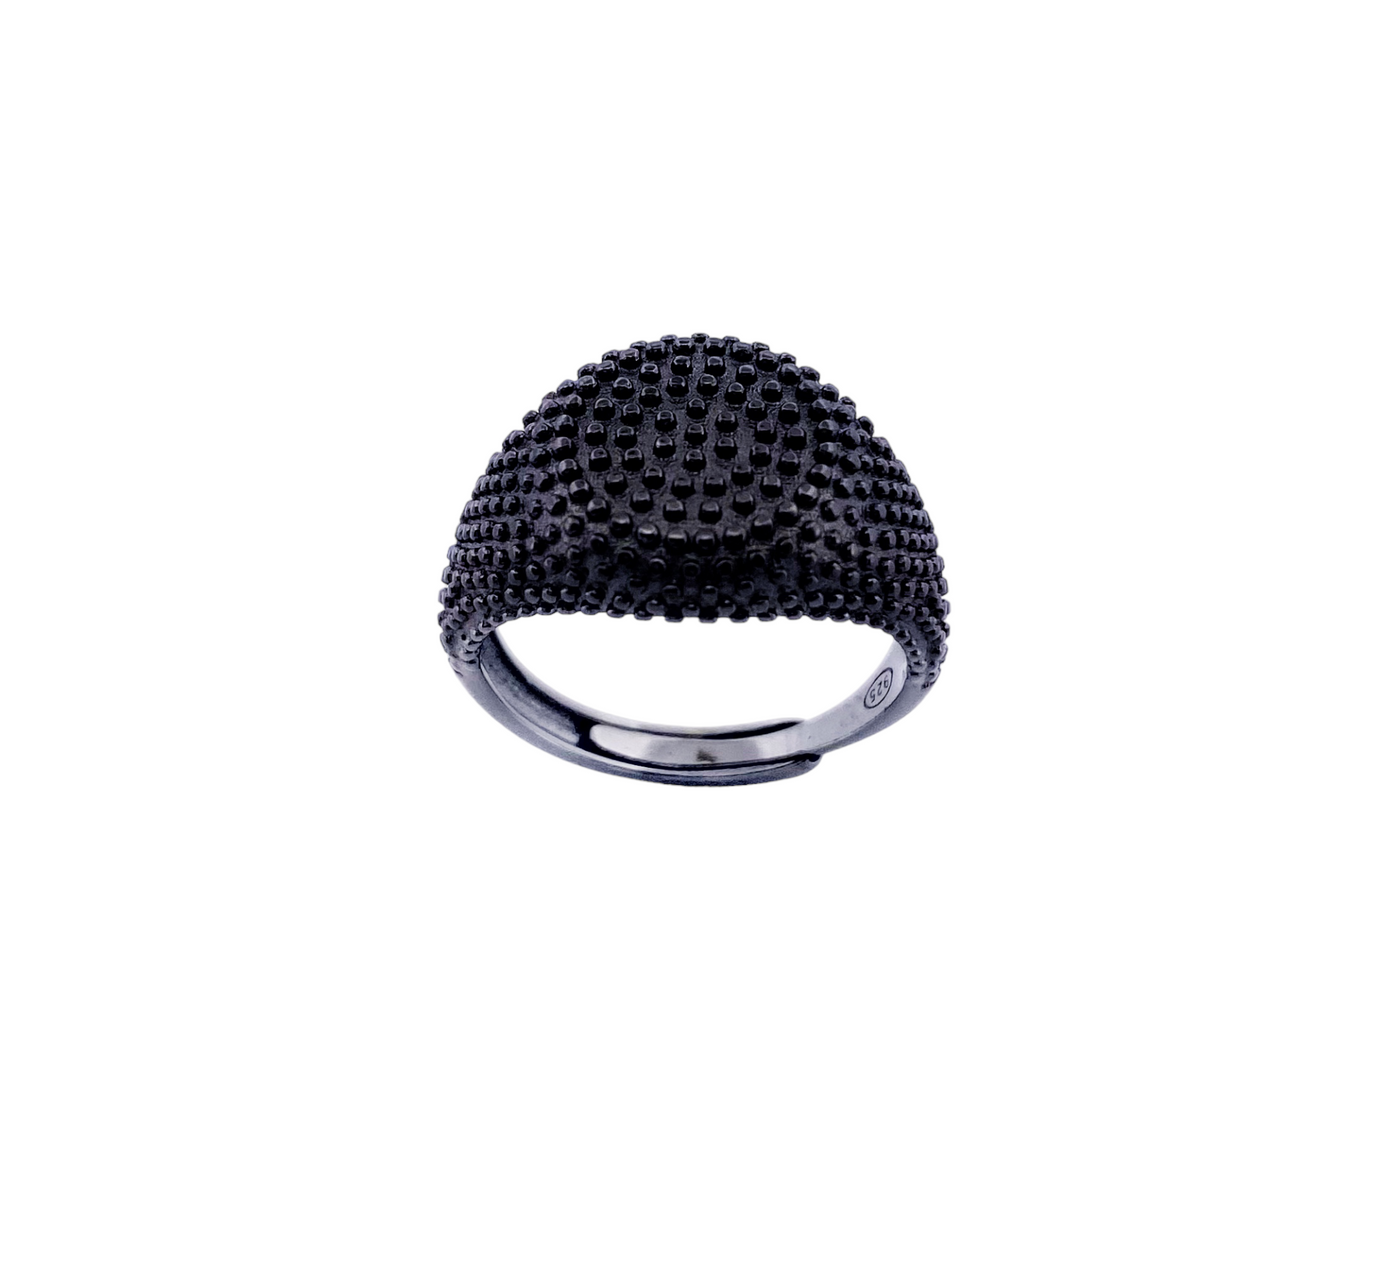 OVAL MAN RING